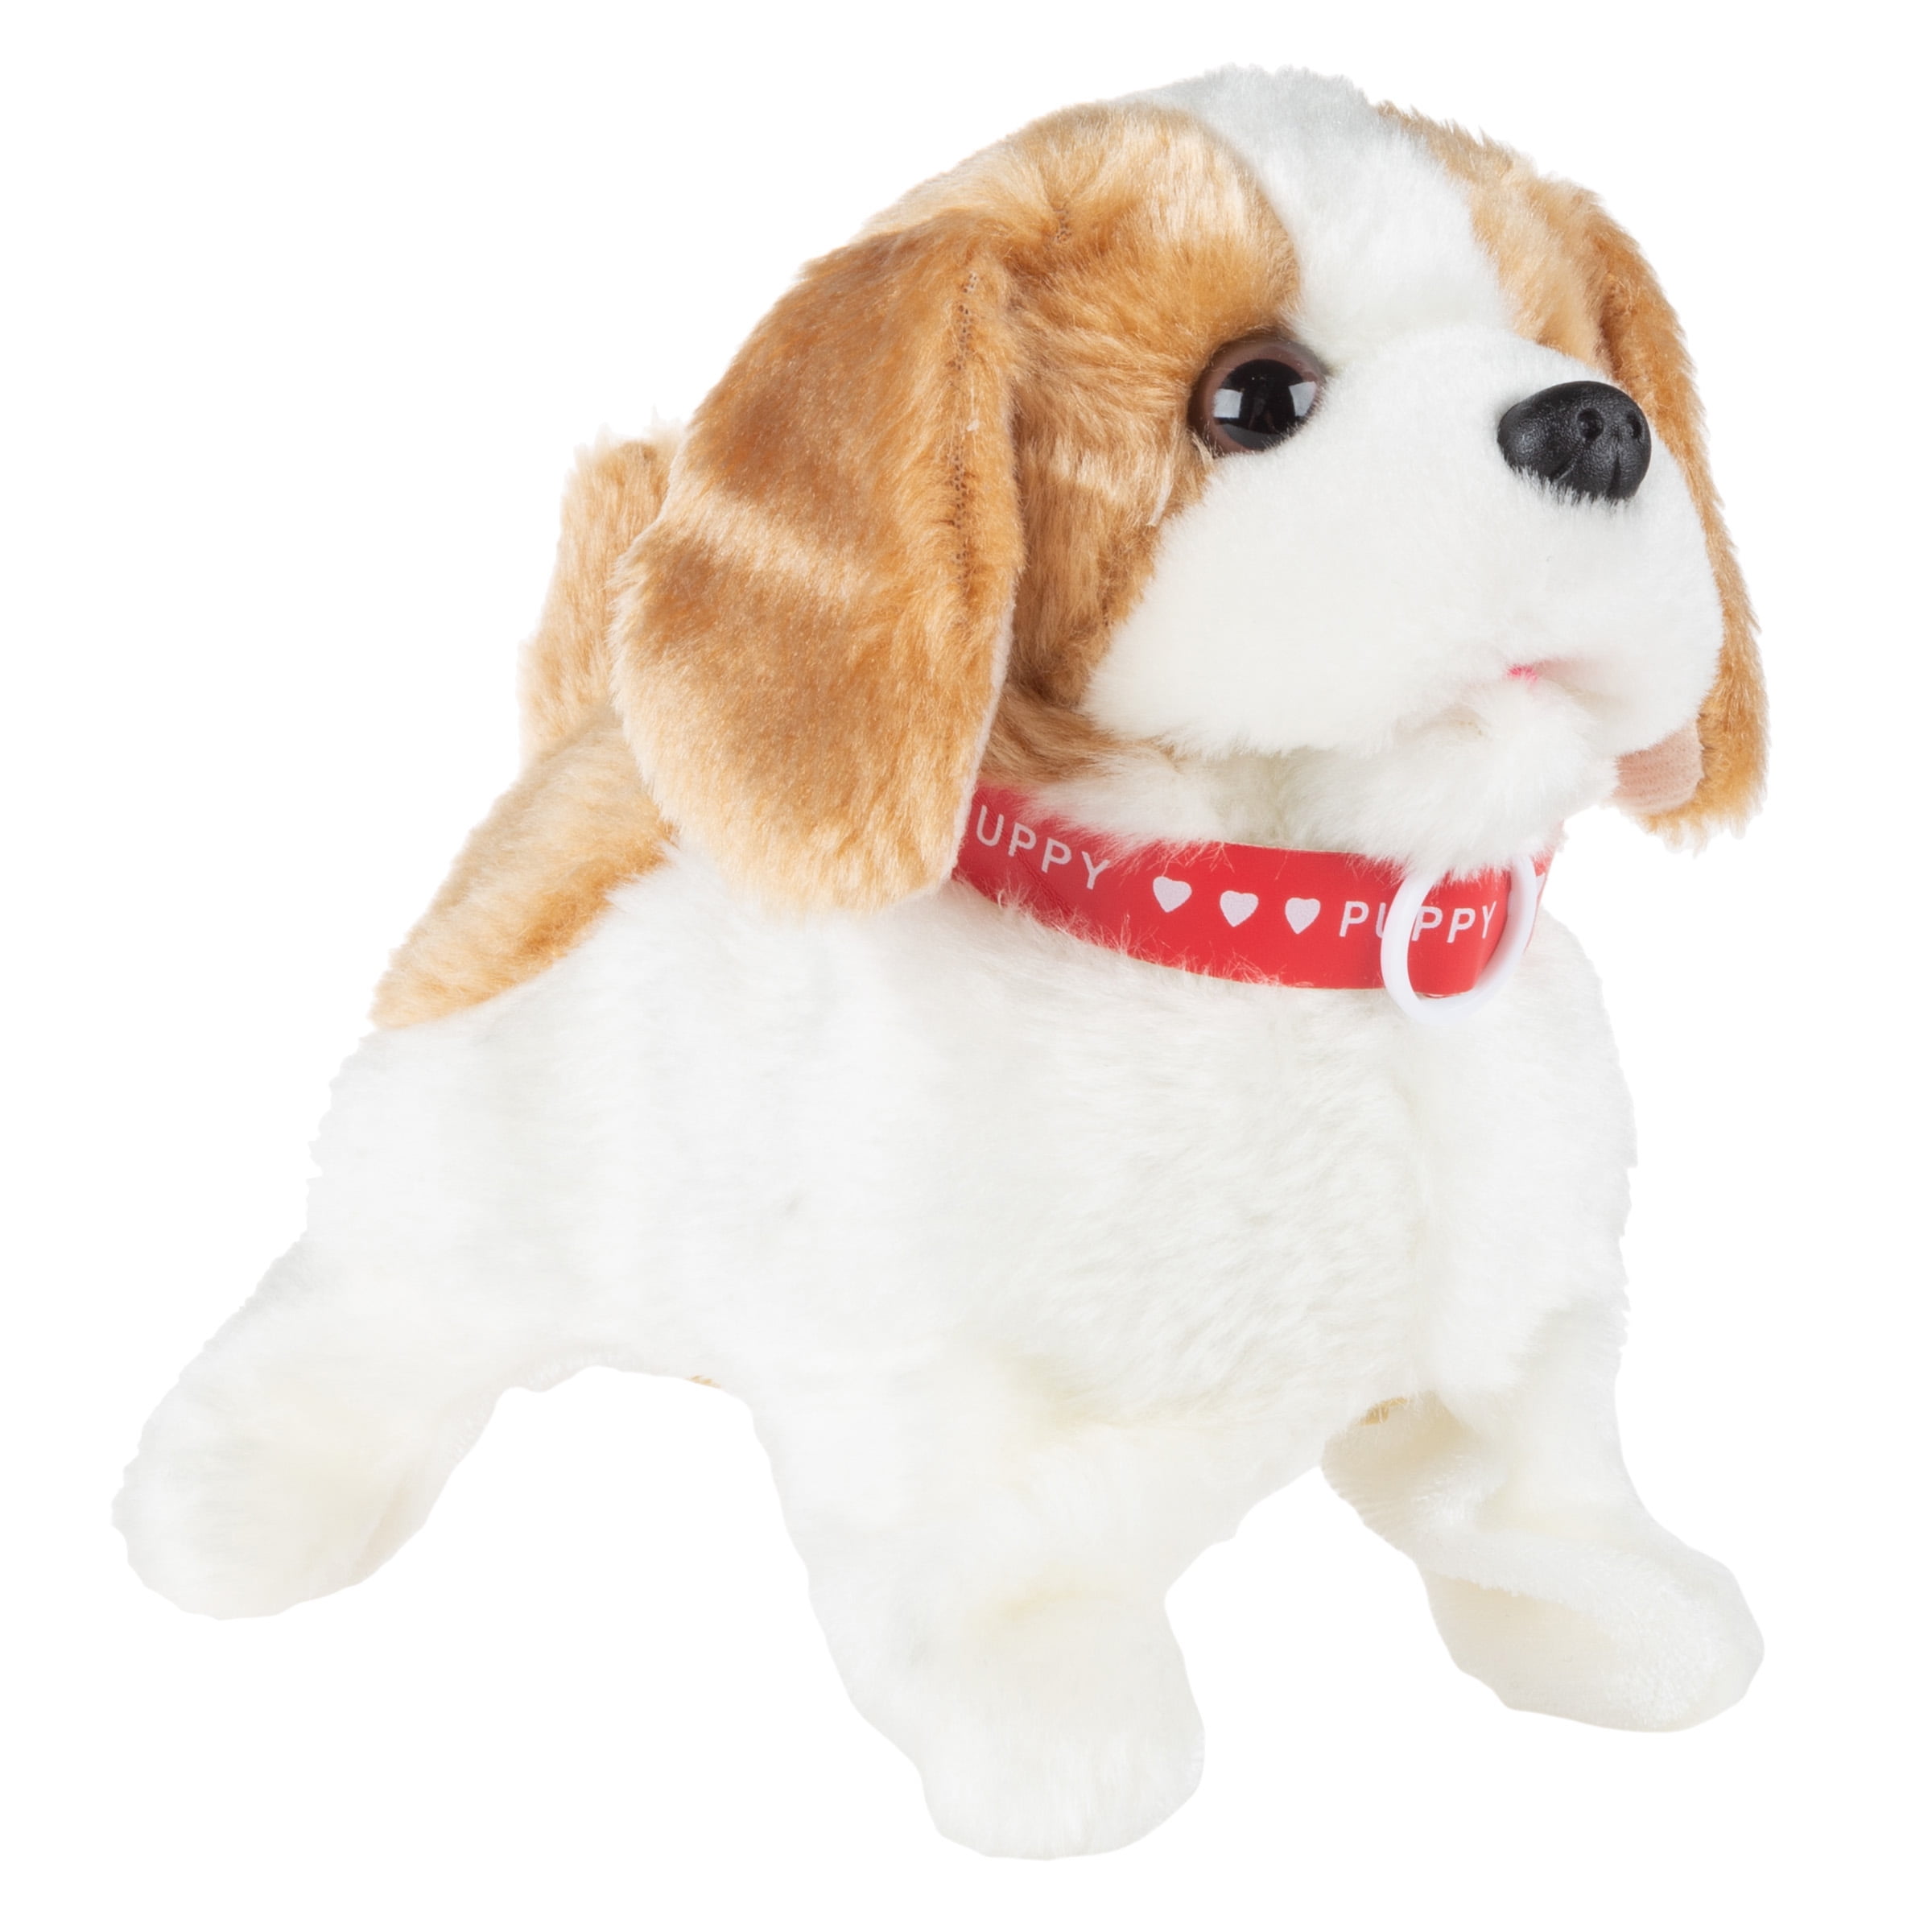 Redley The Retriever Plush Battery Operated Dog Toy Walks Wiggles Barks Sound 